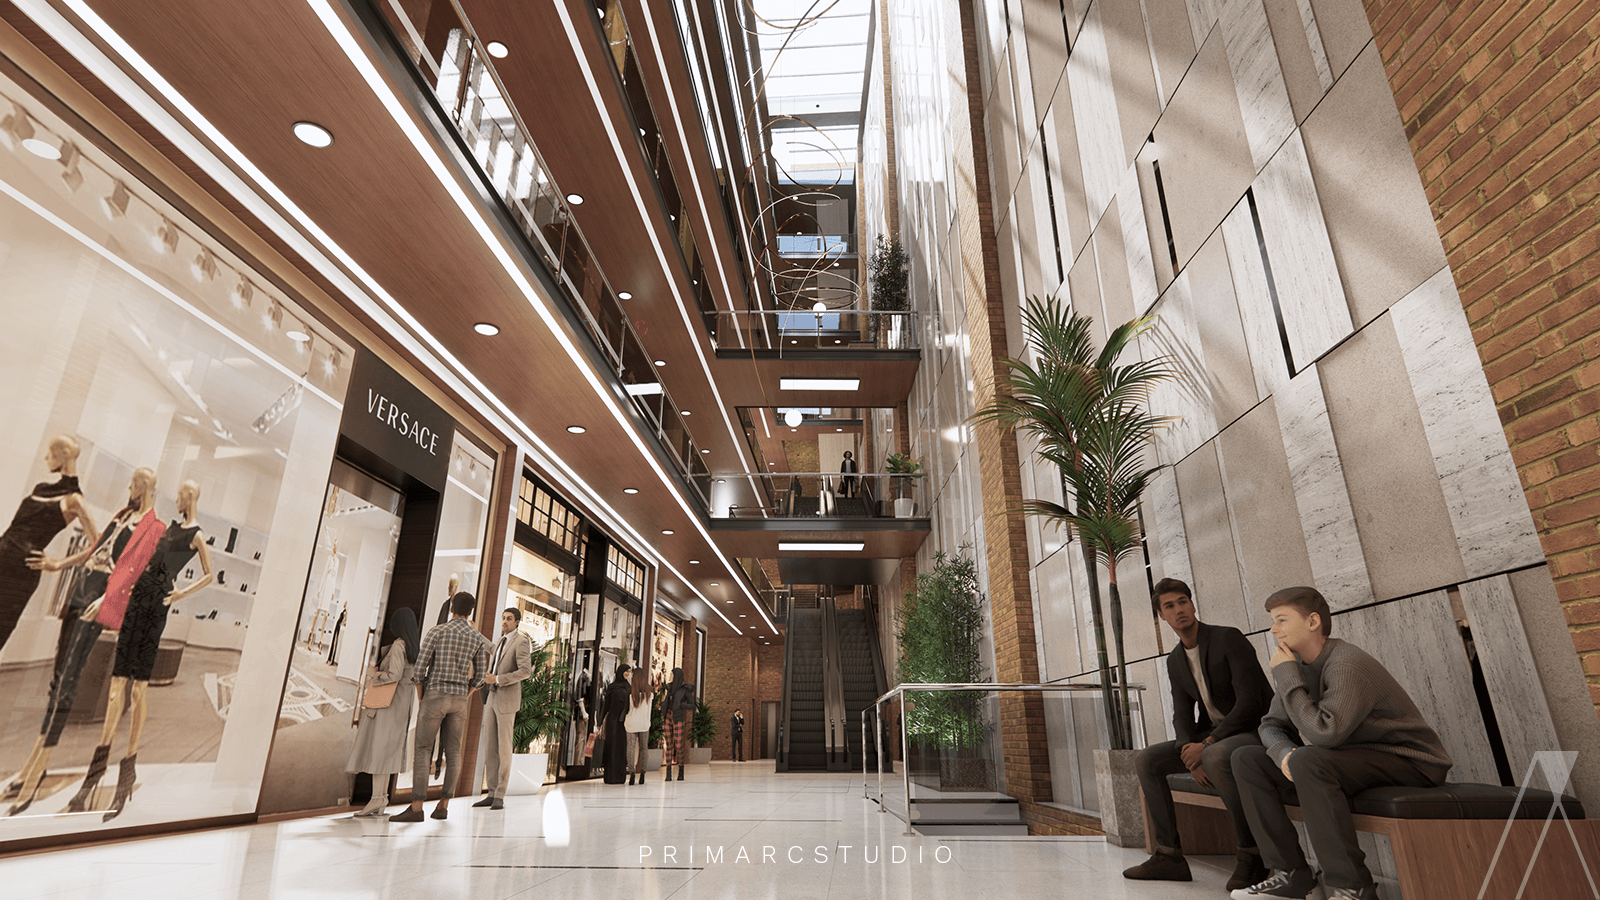 Atrium design with shops on the side - well lit overall